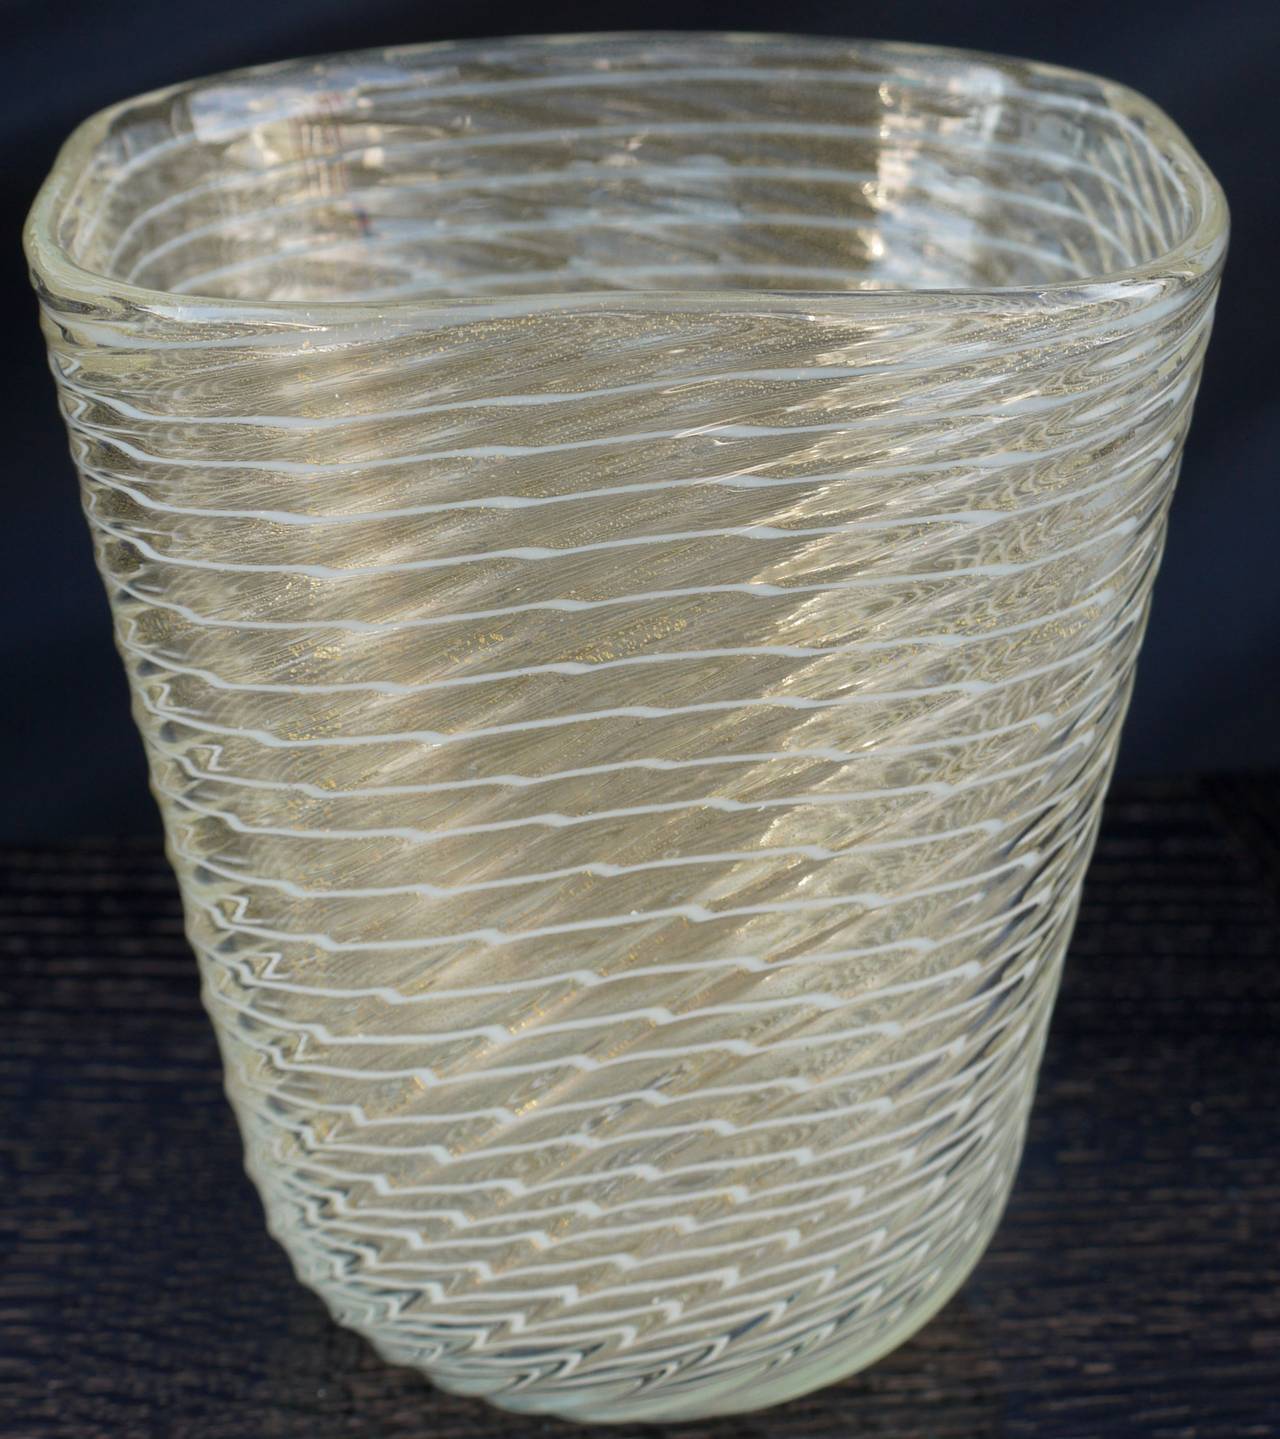 Late 1930s-early 1940s zebratto glass vase with gold inclusions by Ercole Barovier.